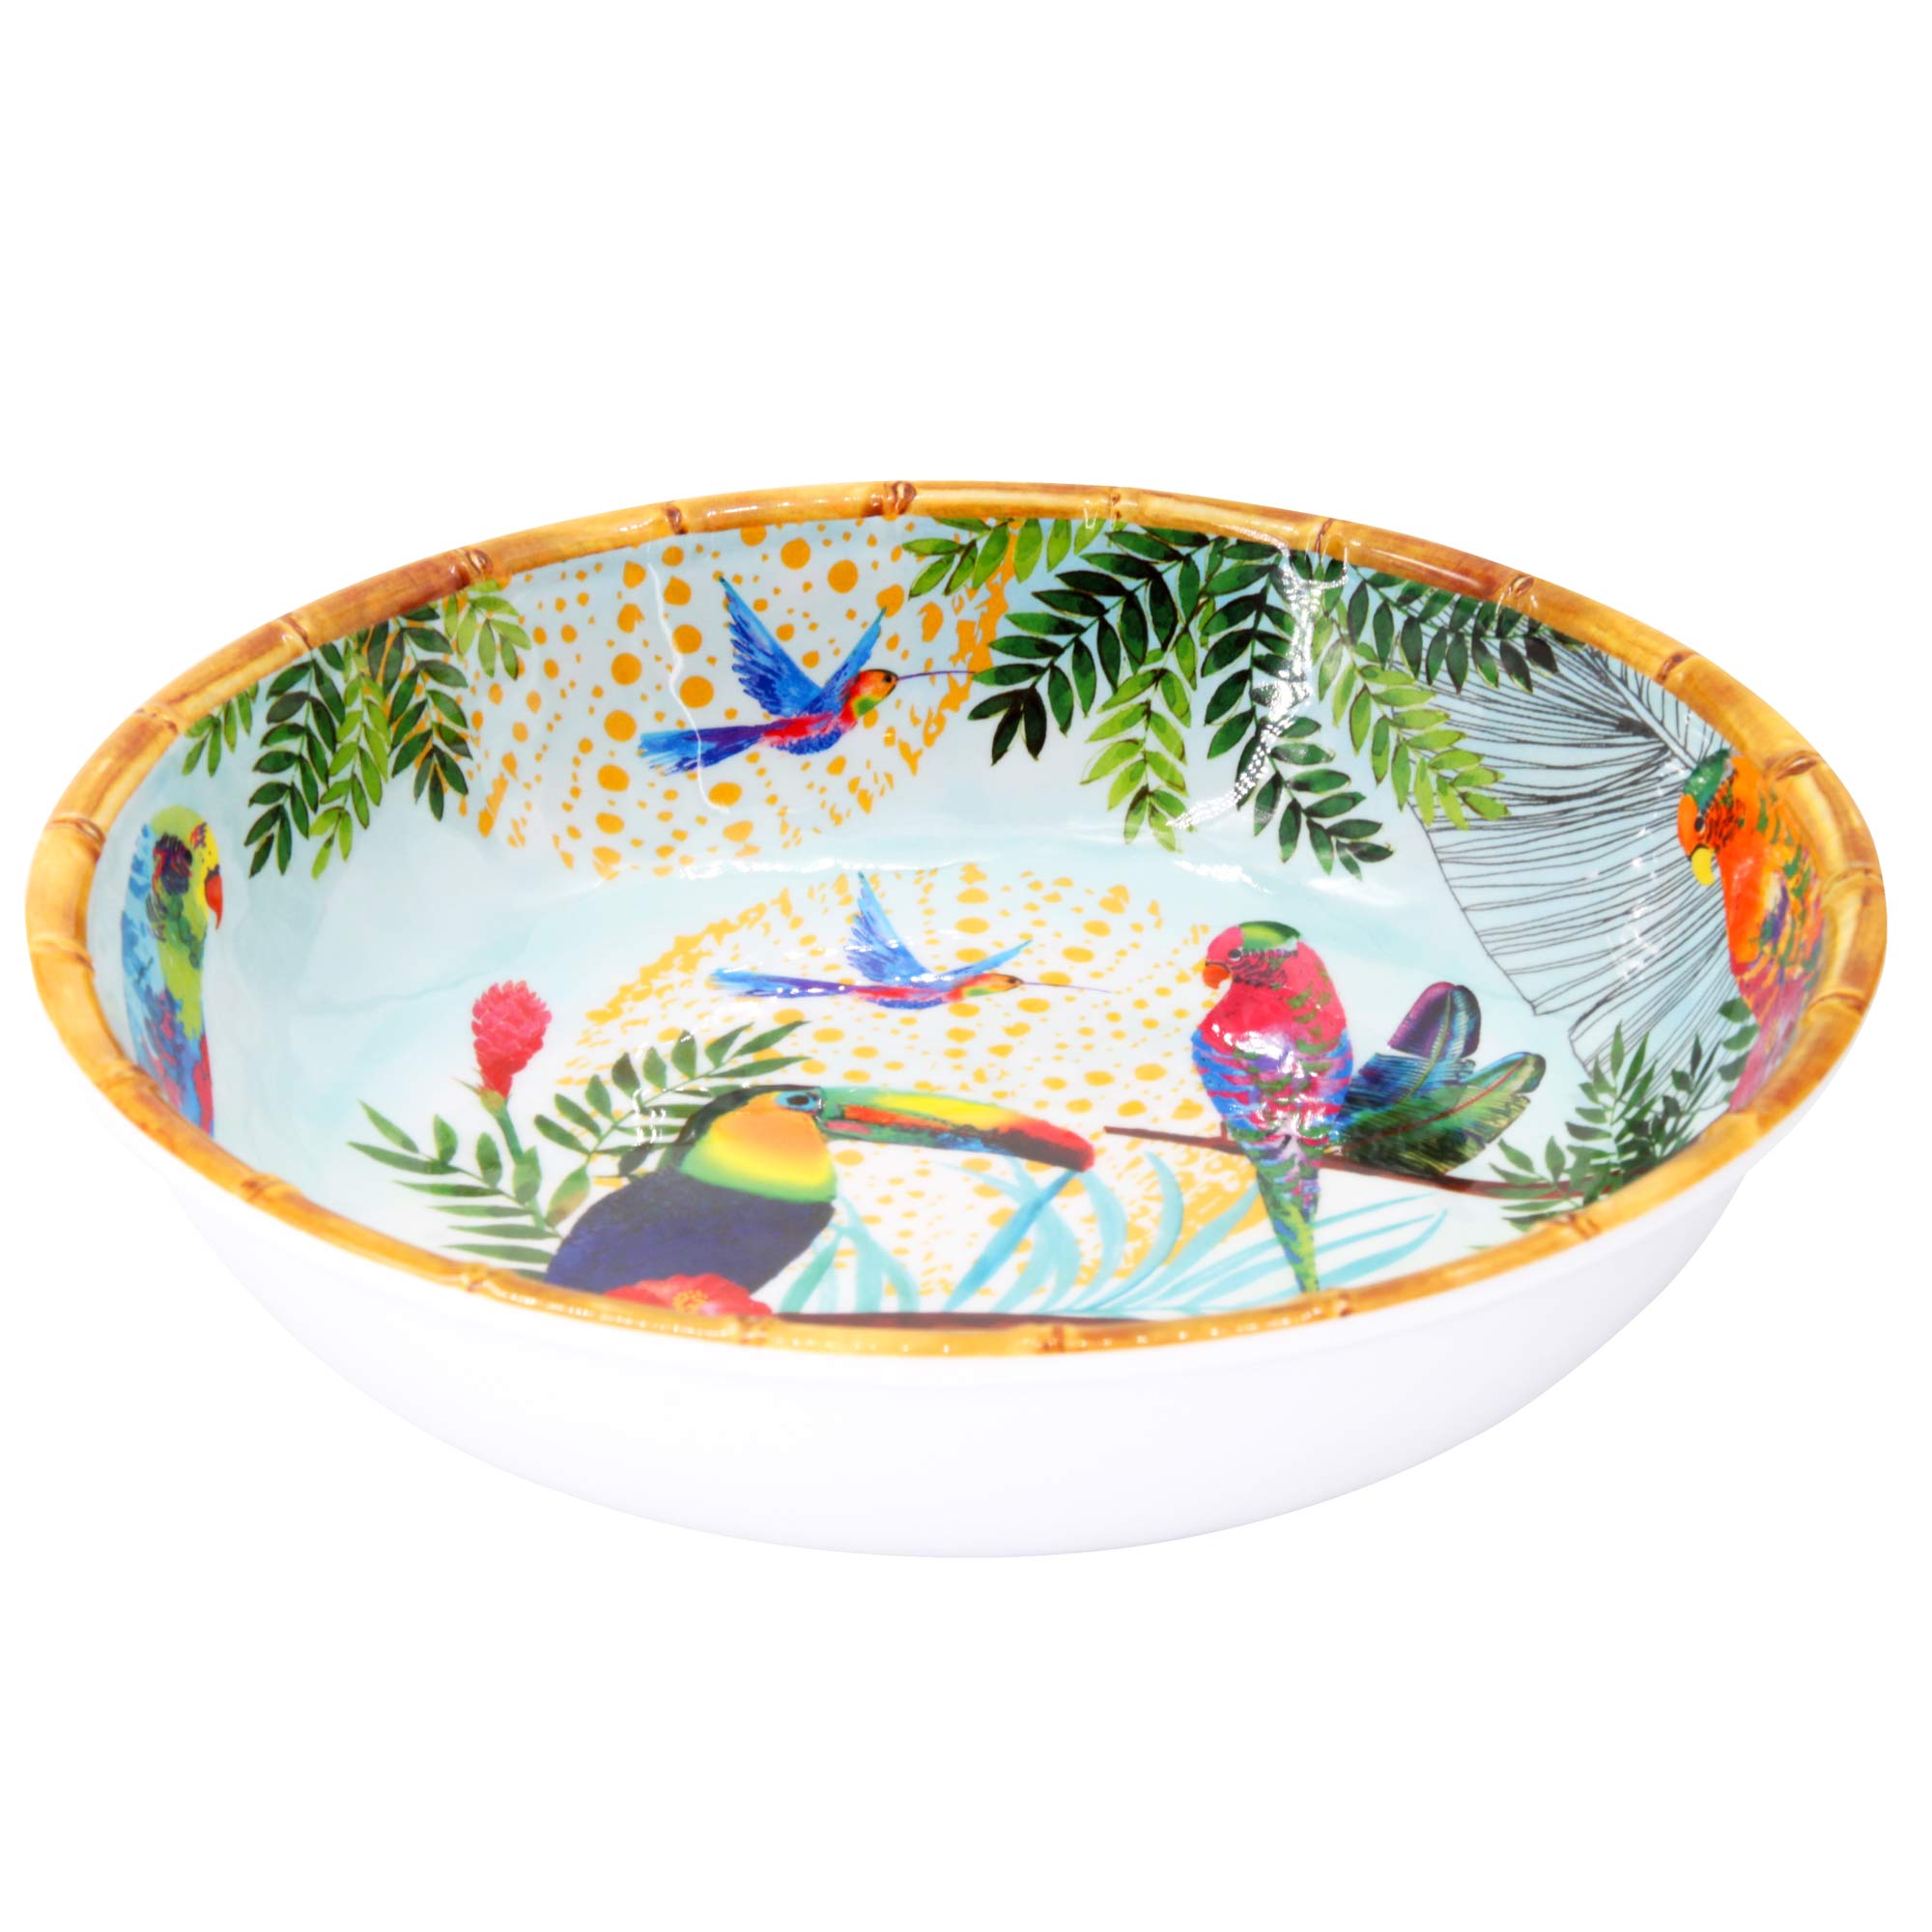 Les Jardins de la Comtesse Large Soup or Pasta Plate Pure Melamine with Bamboo Edges Exotic Flowers Diameter 23 cm Coral Red/Green Unbreakable Dinner Service 